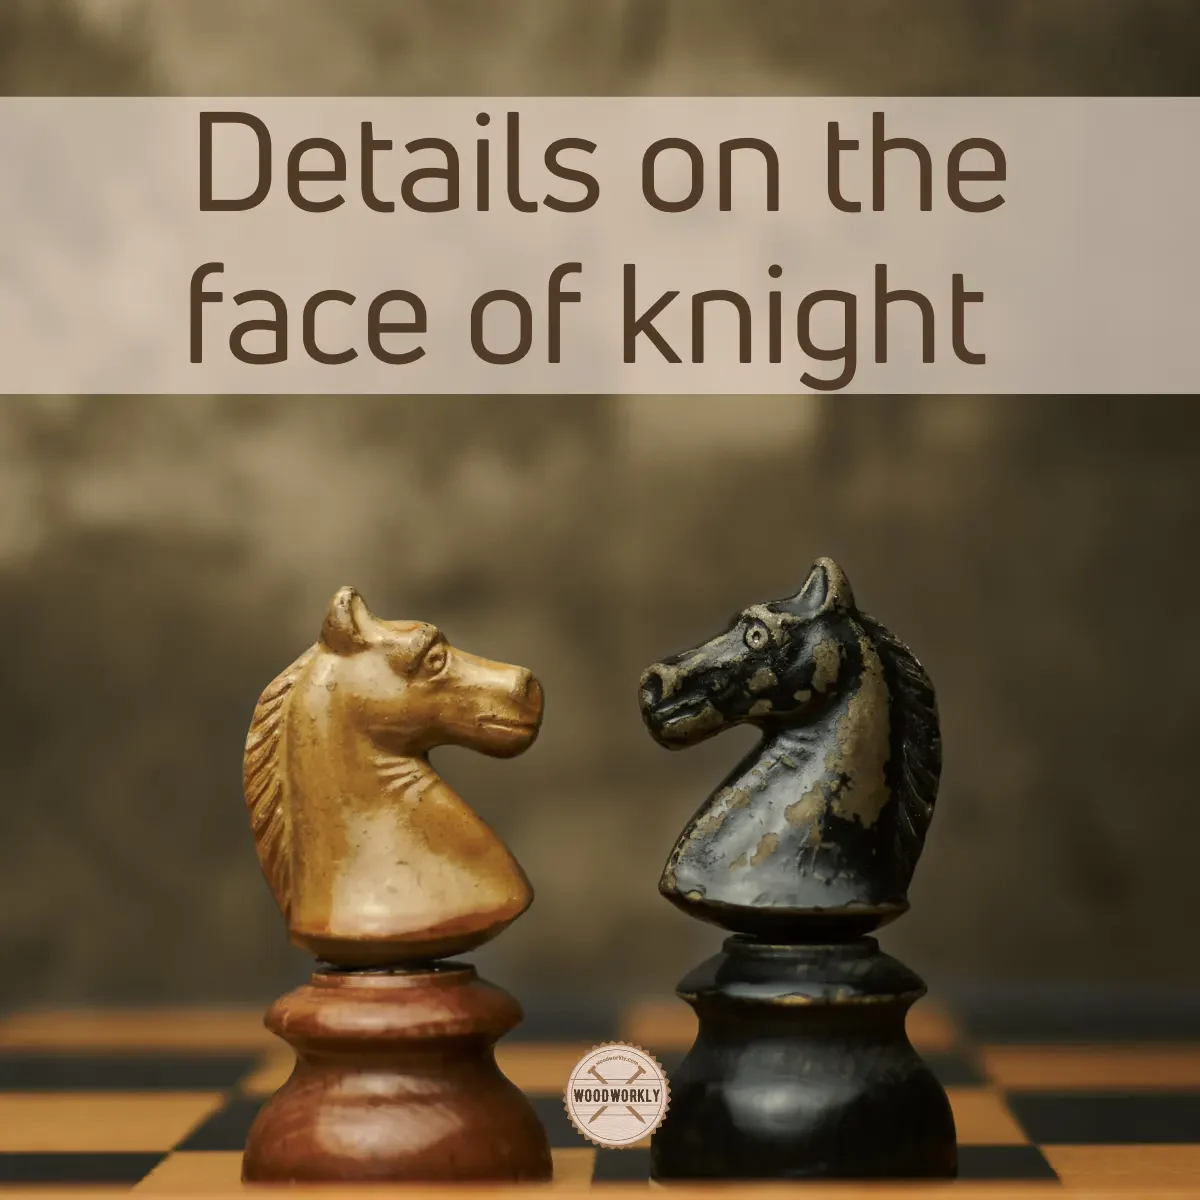 Details on the face of chess pieces